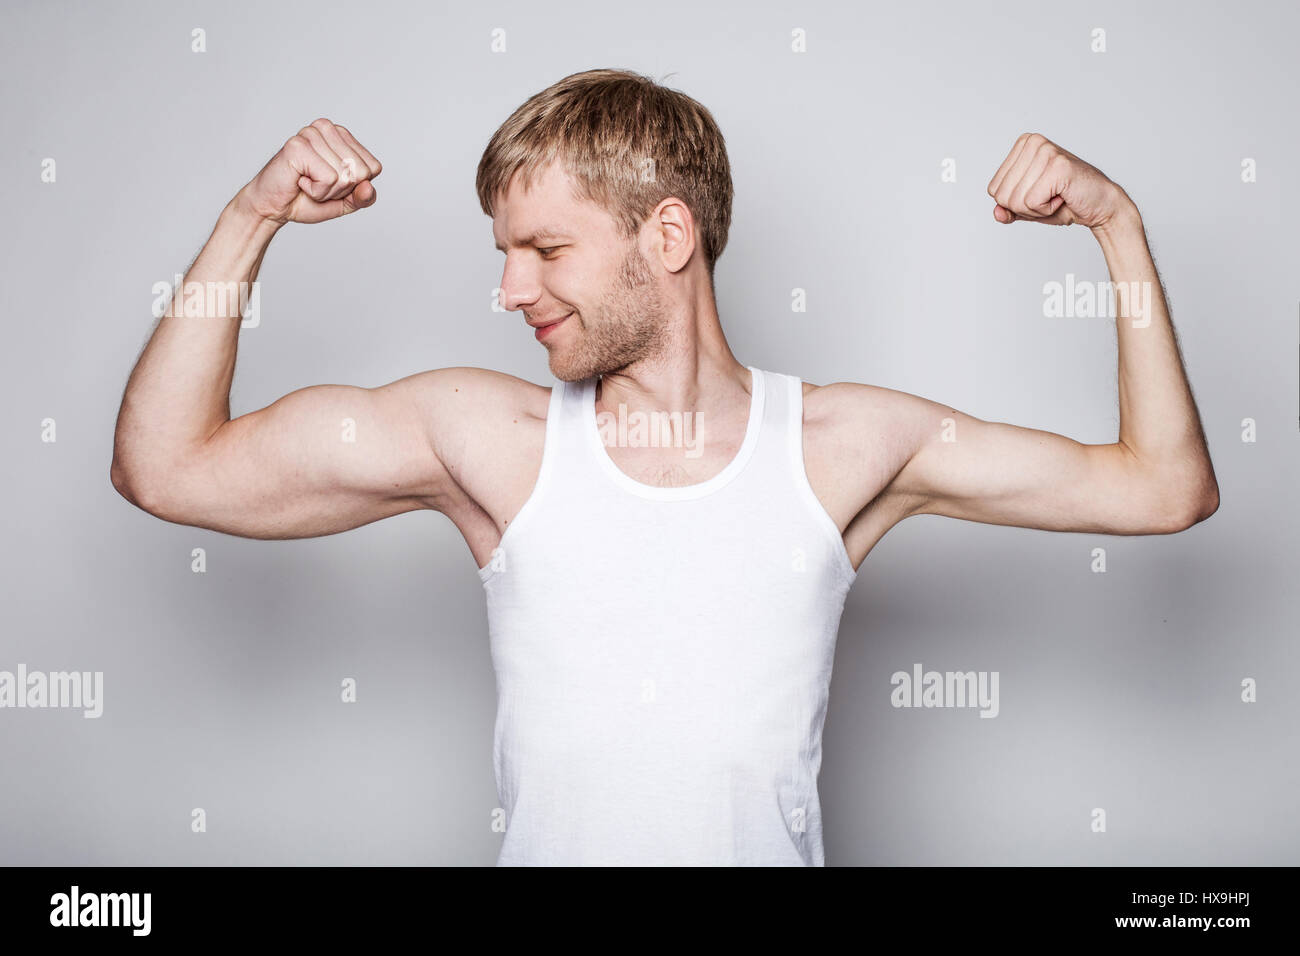 Conceptual portrait of a right handed man Stock Photo